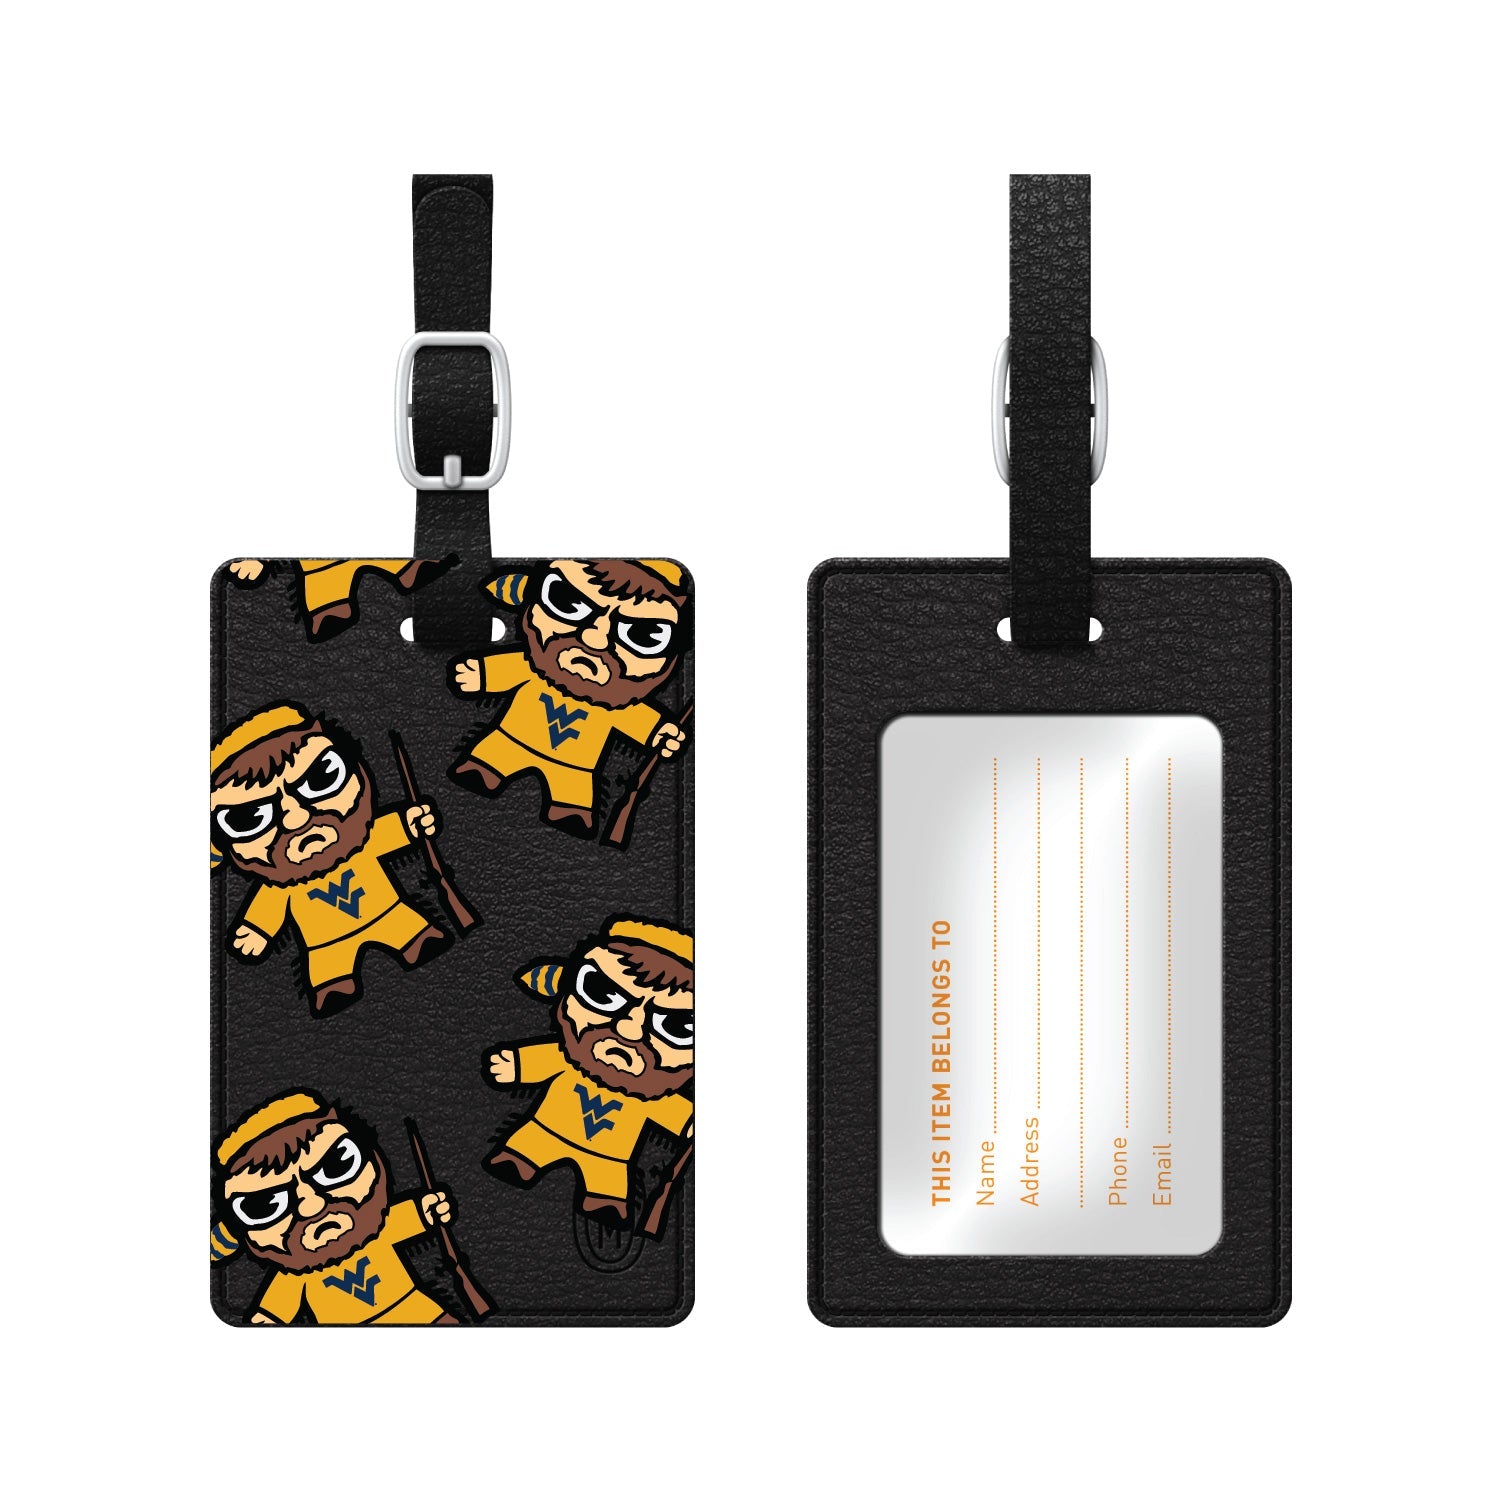 West Virginia University Faux Leather Luggage Tag, Tokyodachi Mascot